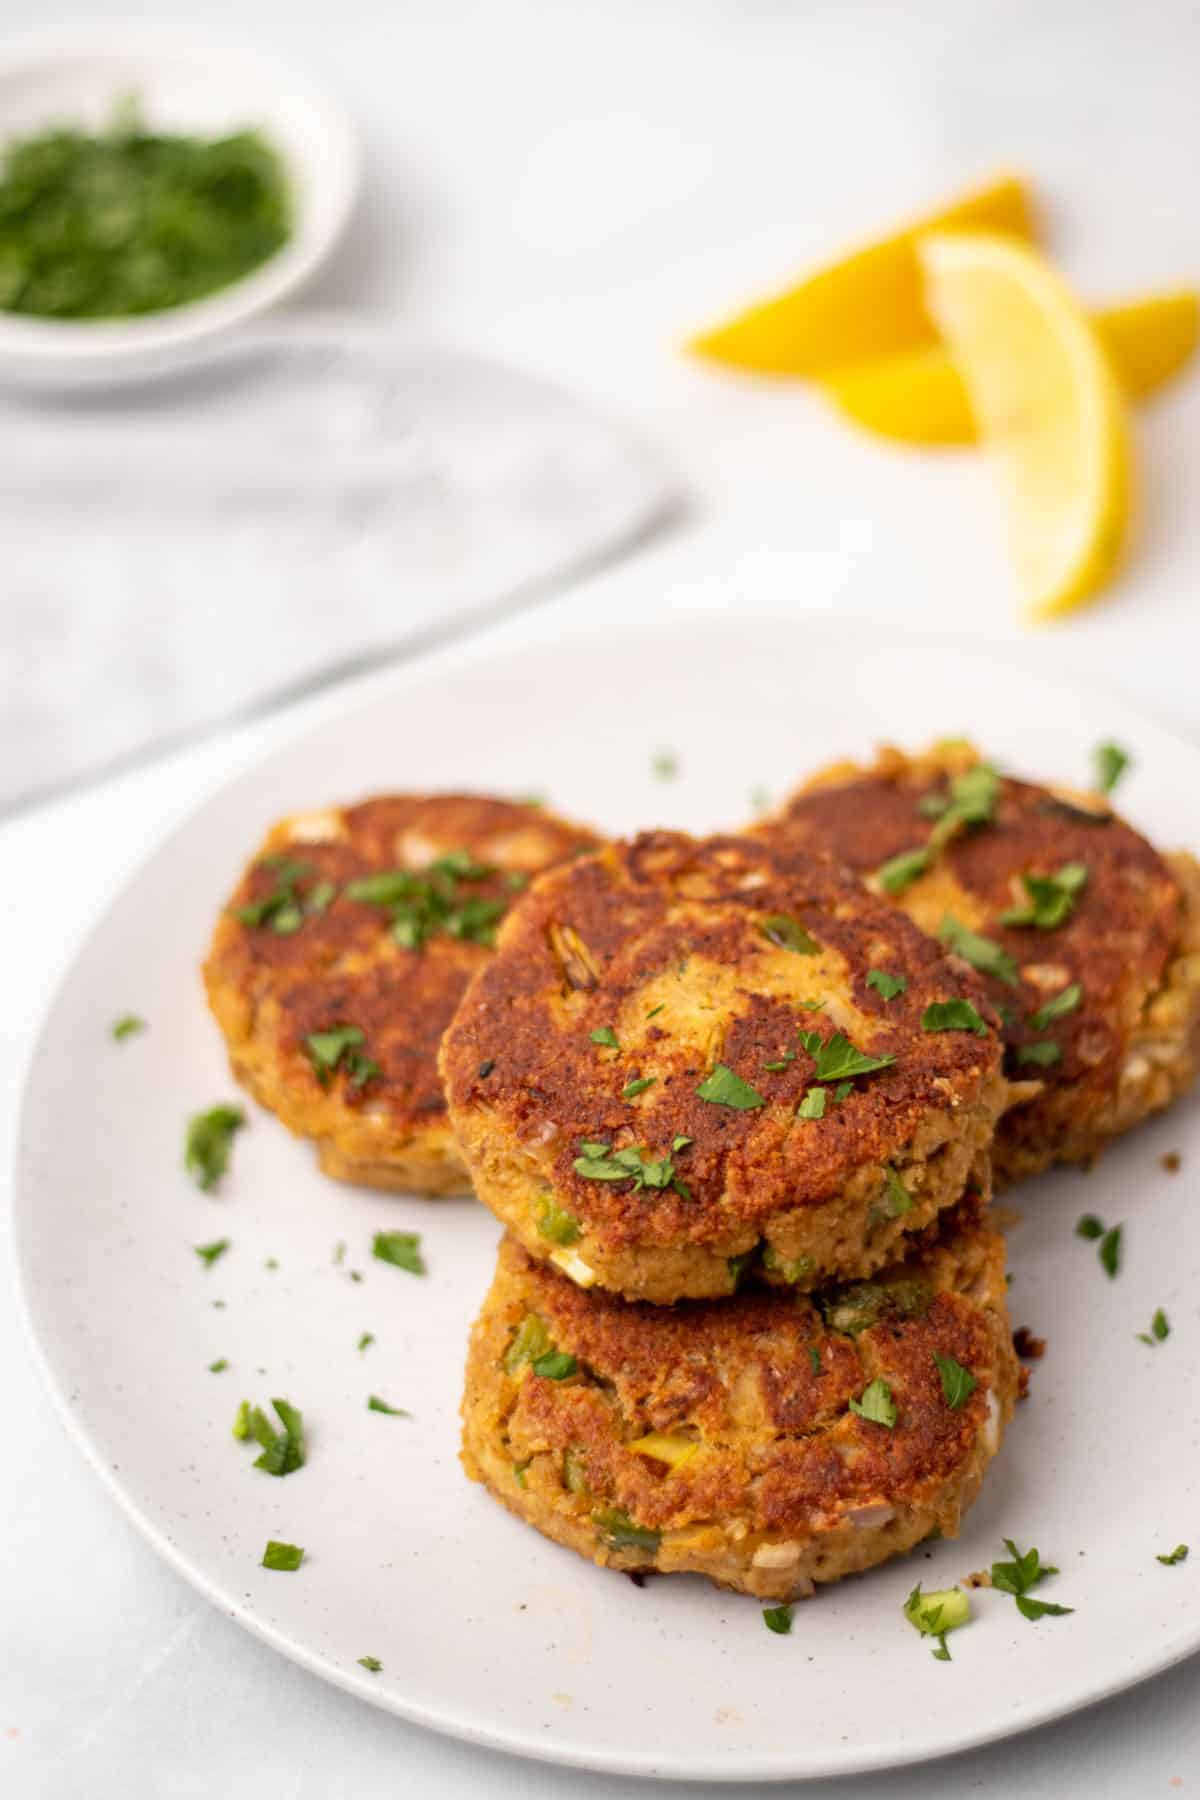 Four Low-Carb Crab Cakes on a white plate garnished with chopped parsley